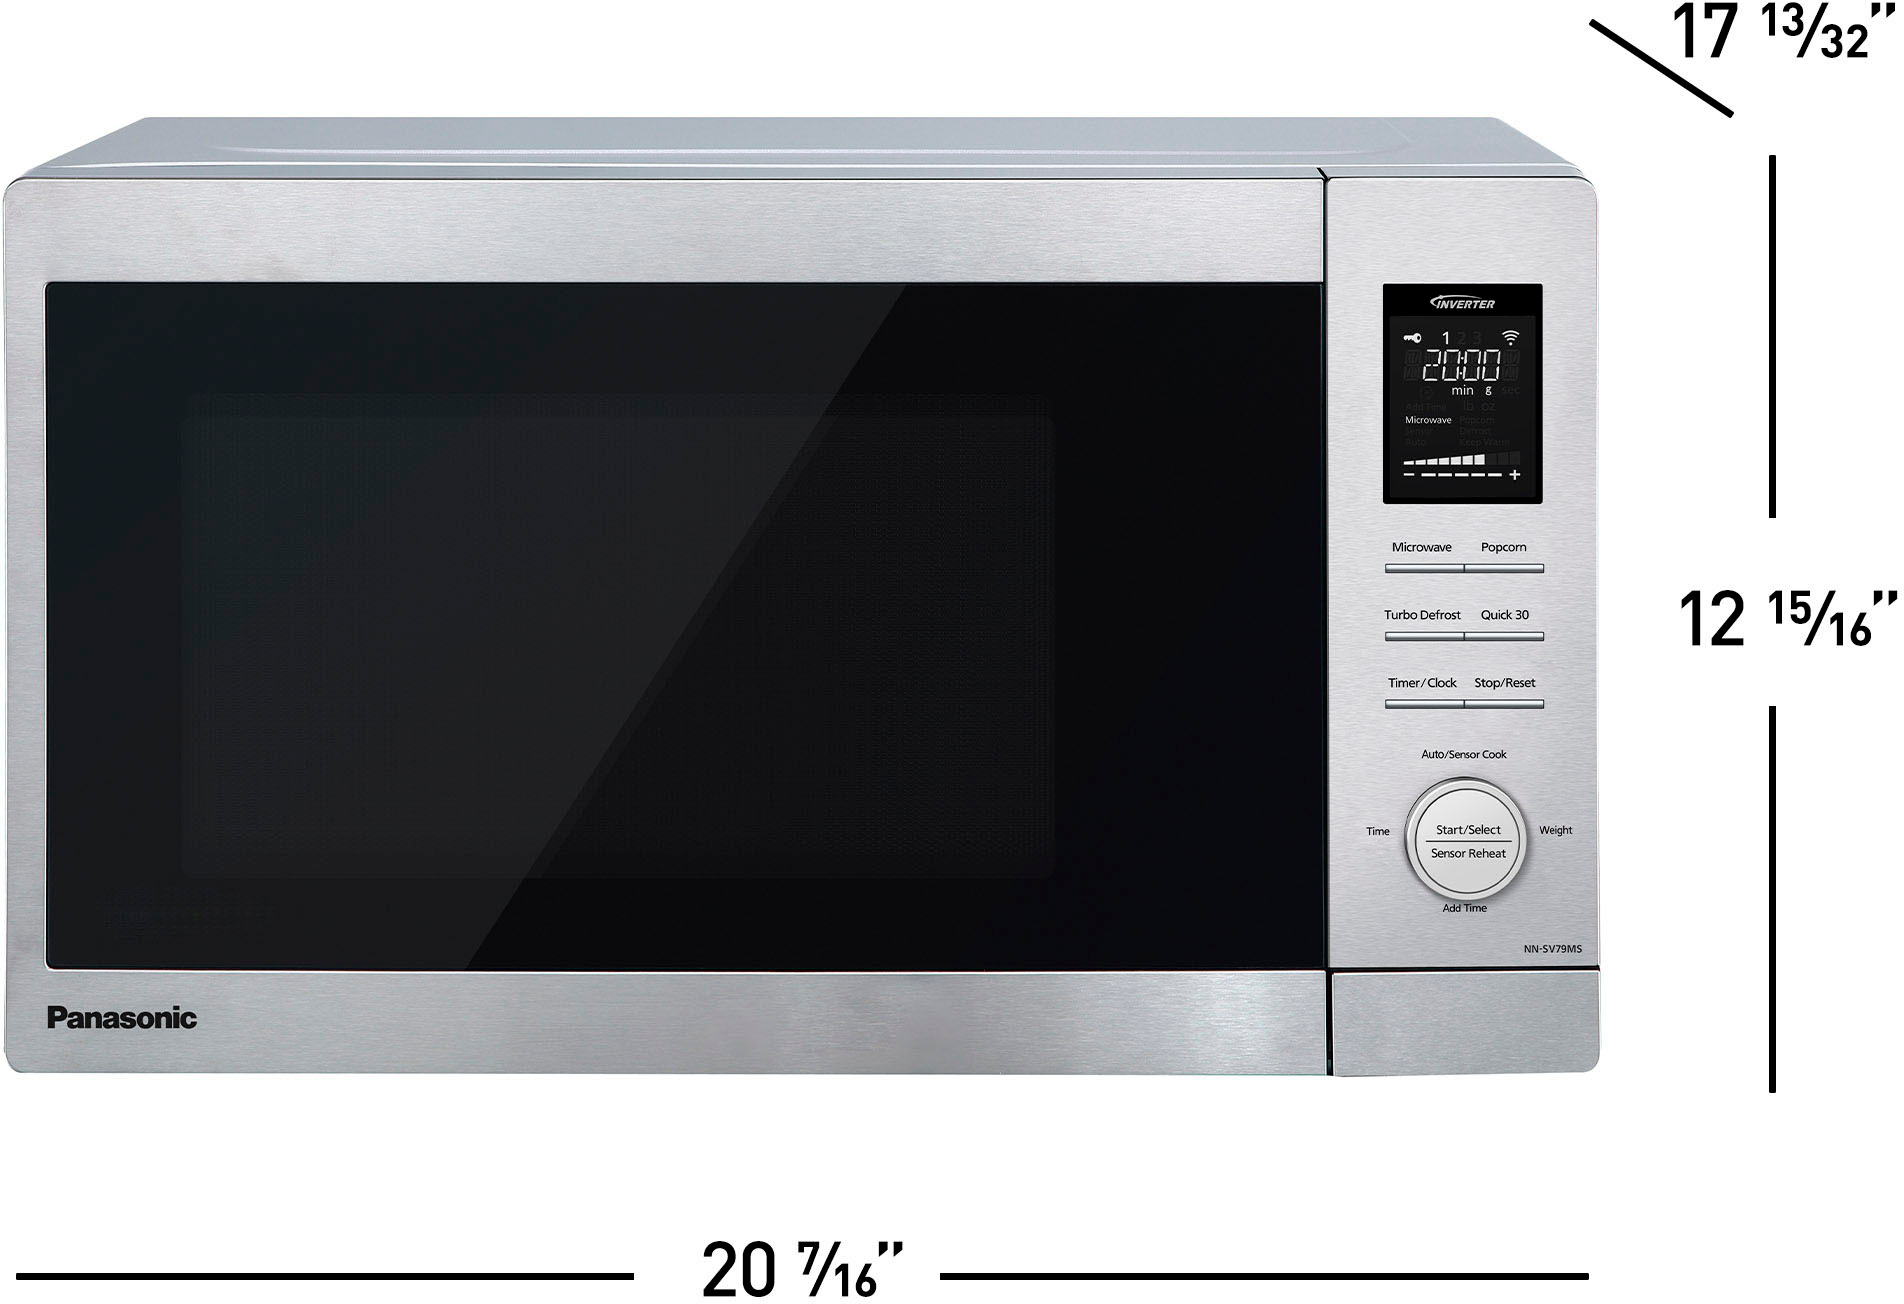  COMMERCIAL CHEF 1.4 Cubic Foot Microwave with 10 Power Levels, Small  Microwave with Push Button, 1100 Watt Microwave with Digital Control  Panels, Countertop Microwave with Timer, Stainless Steel : Home & Kitchen